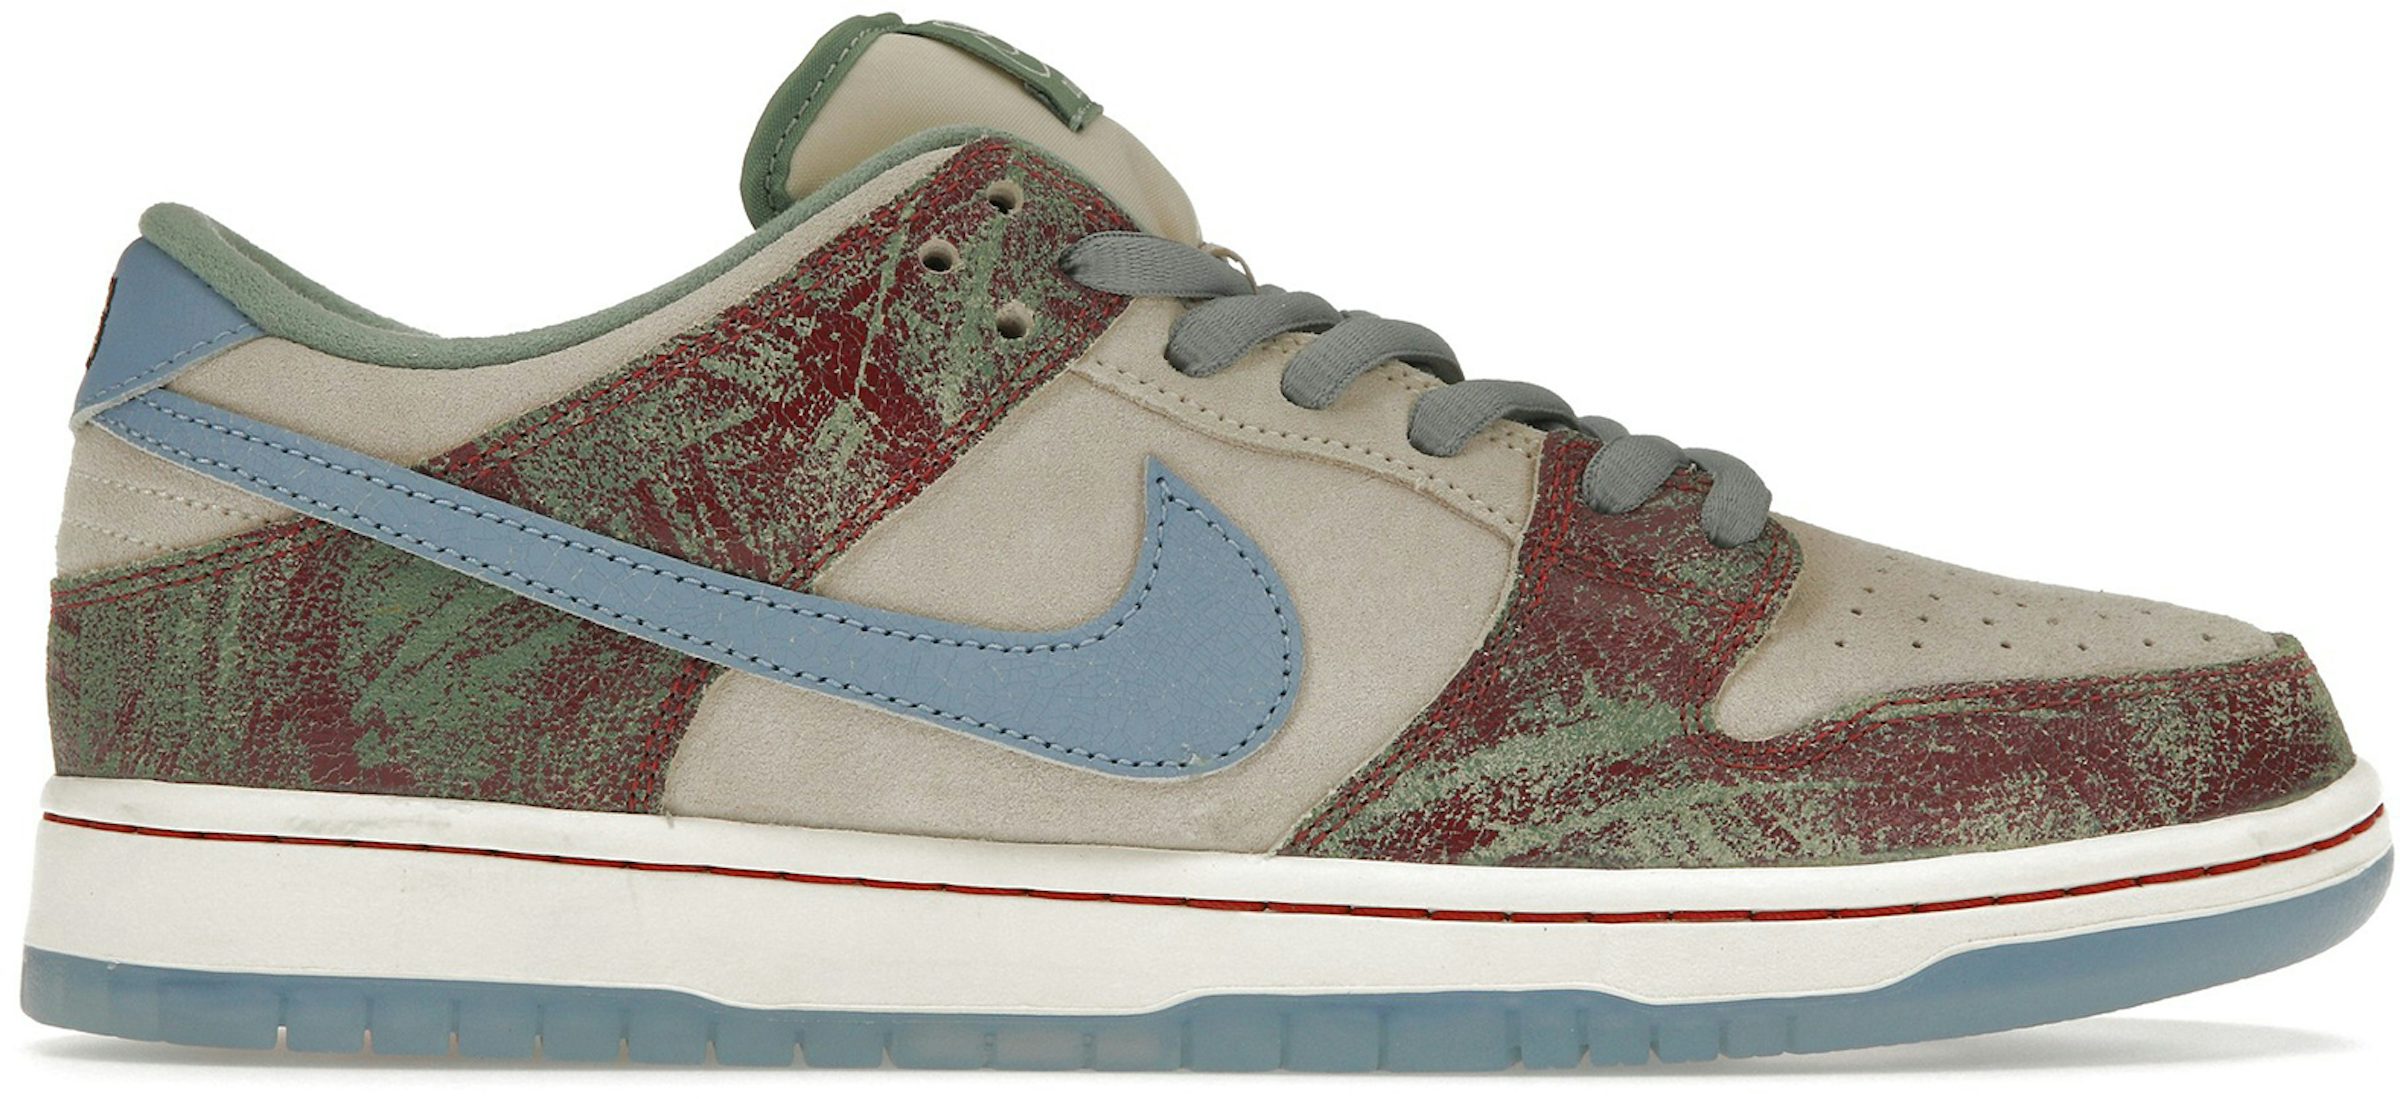 SBD, Louis Vuitton x nike dunk high white black electric blue eyes real  Low Green Suede Sample